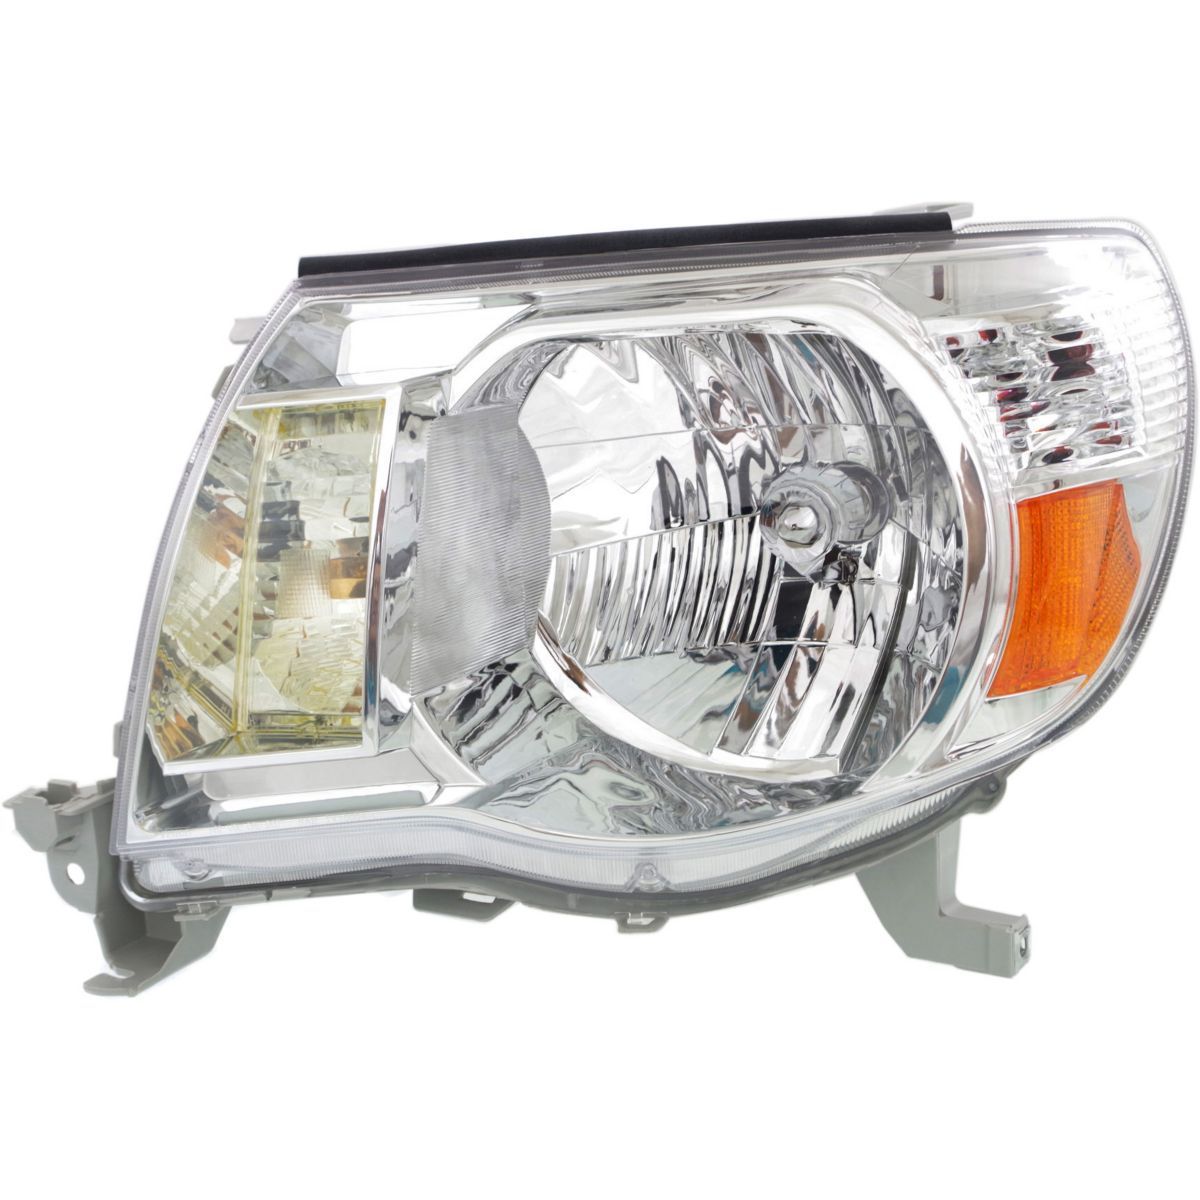 Itasca Suncruiser Left (Driver) Replacement Headlight Assembly